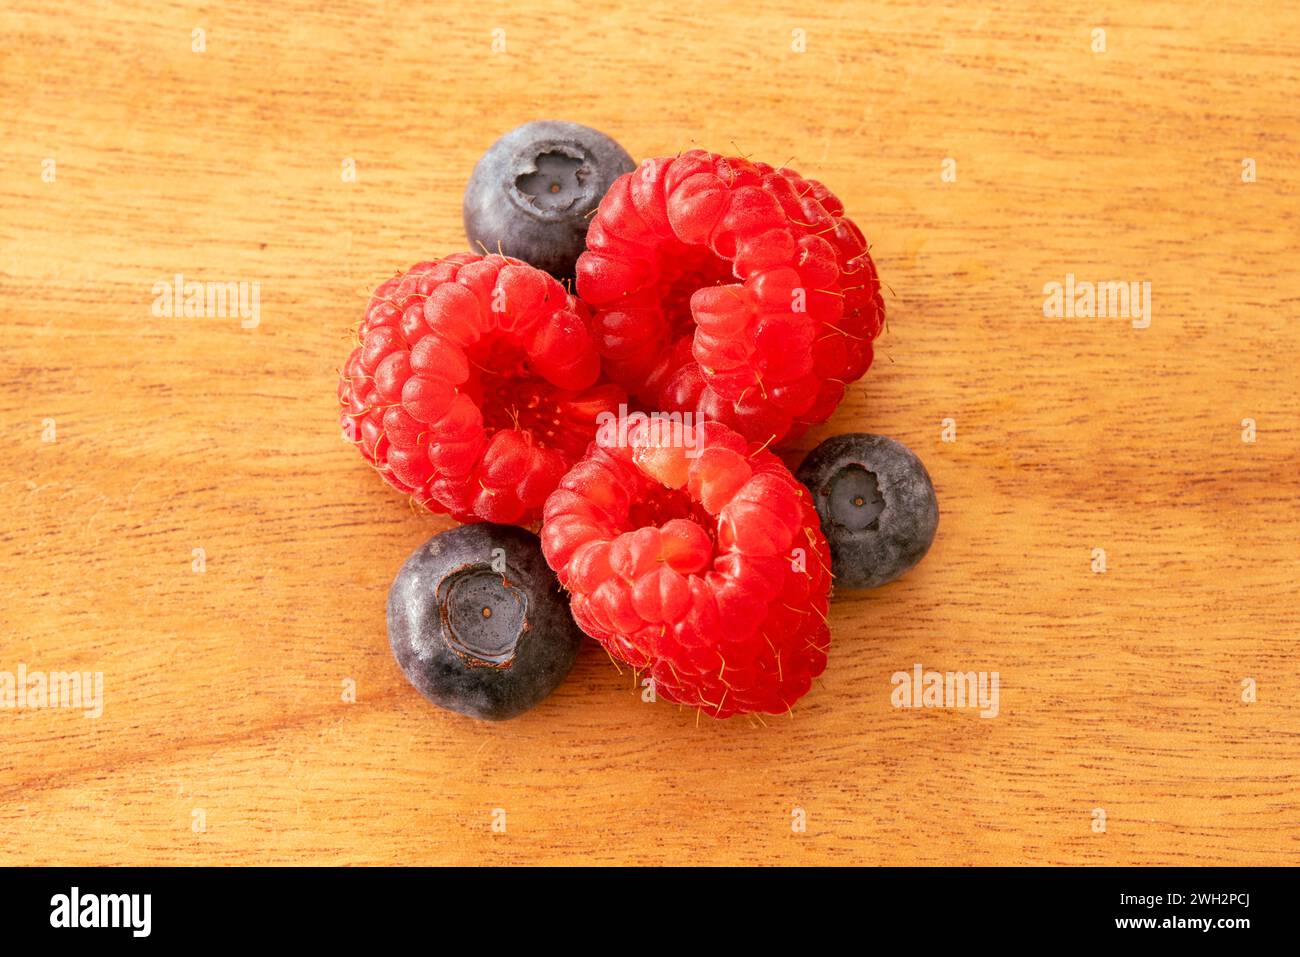 Close up of three raspberries and three blueberries arranged on a wooden snack board in a triangular shape. Stock Photo